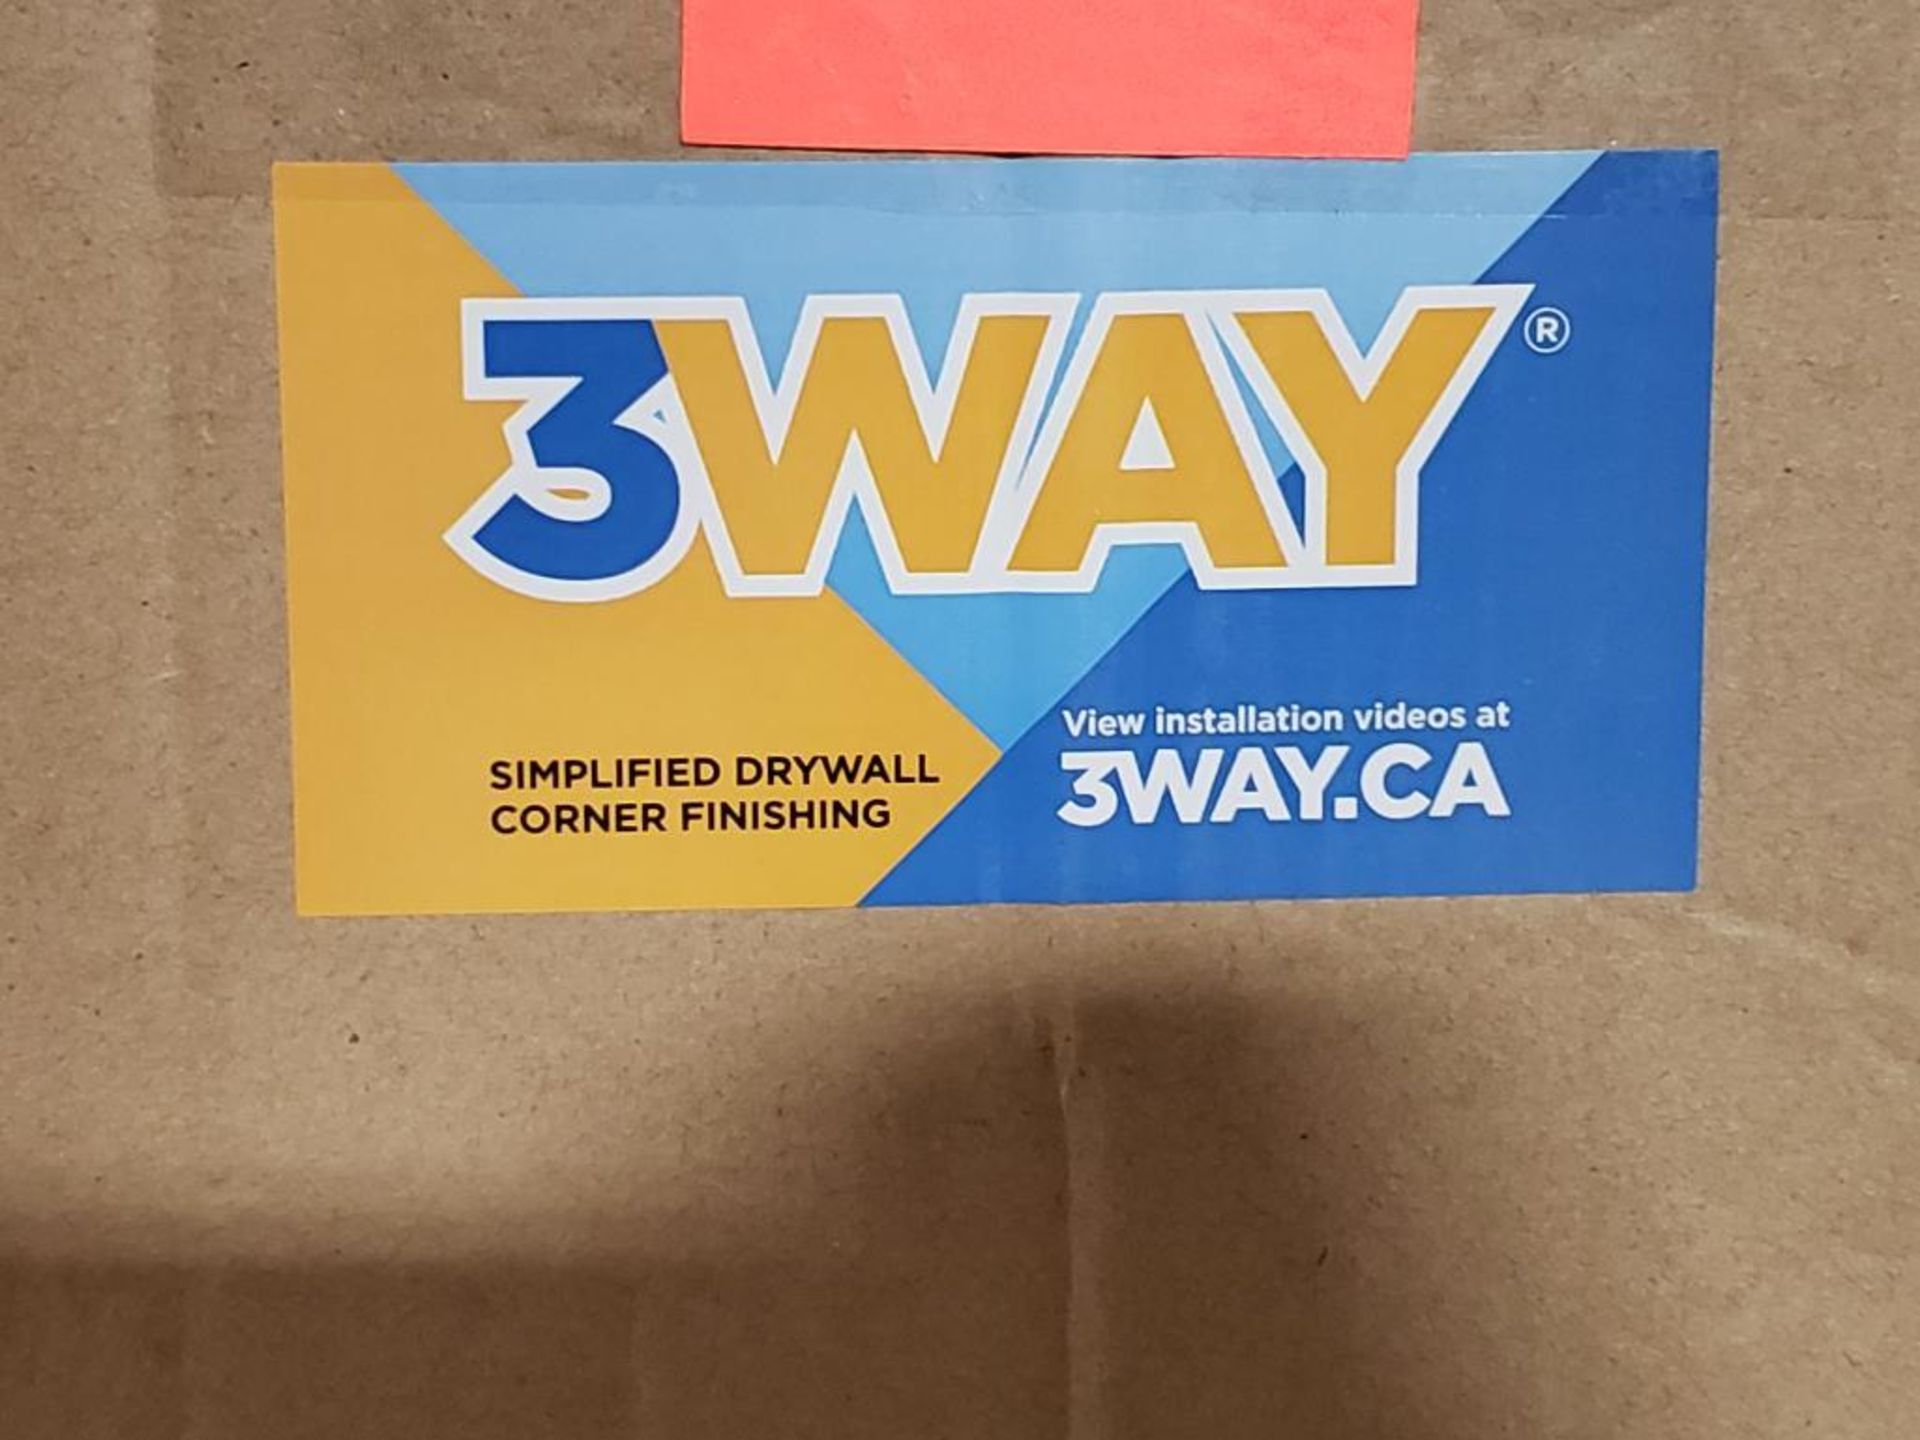 Qty 450 - 3WAY inside drywall corner finishing. 9 boxes of 50. - Image 2 of 3